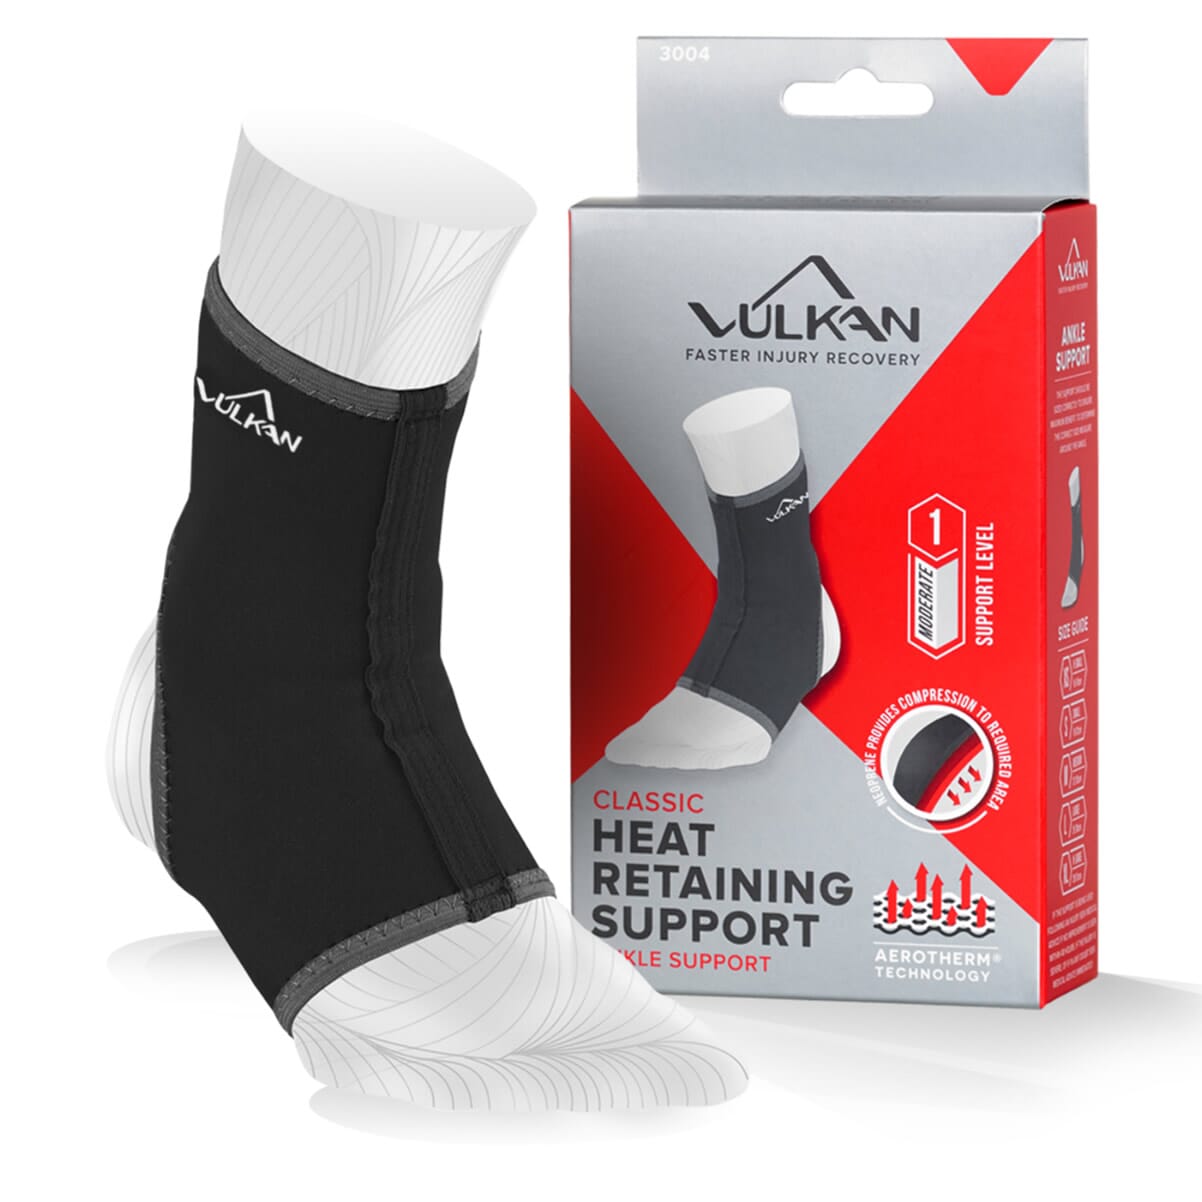 View Ankle Support Vulkan Small information